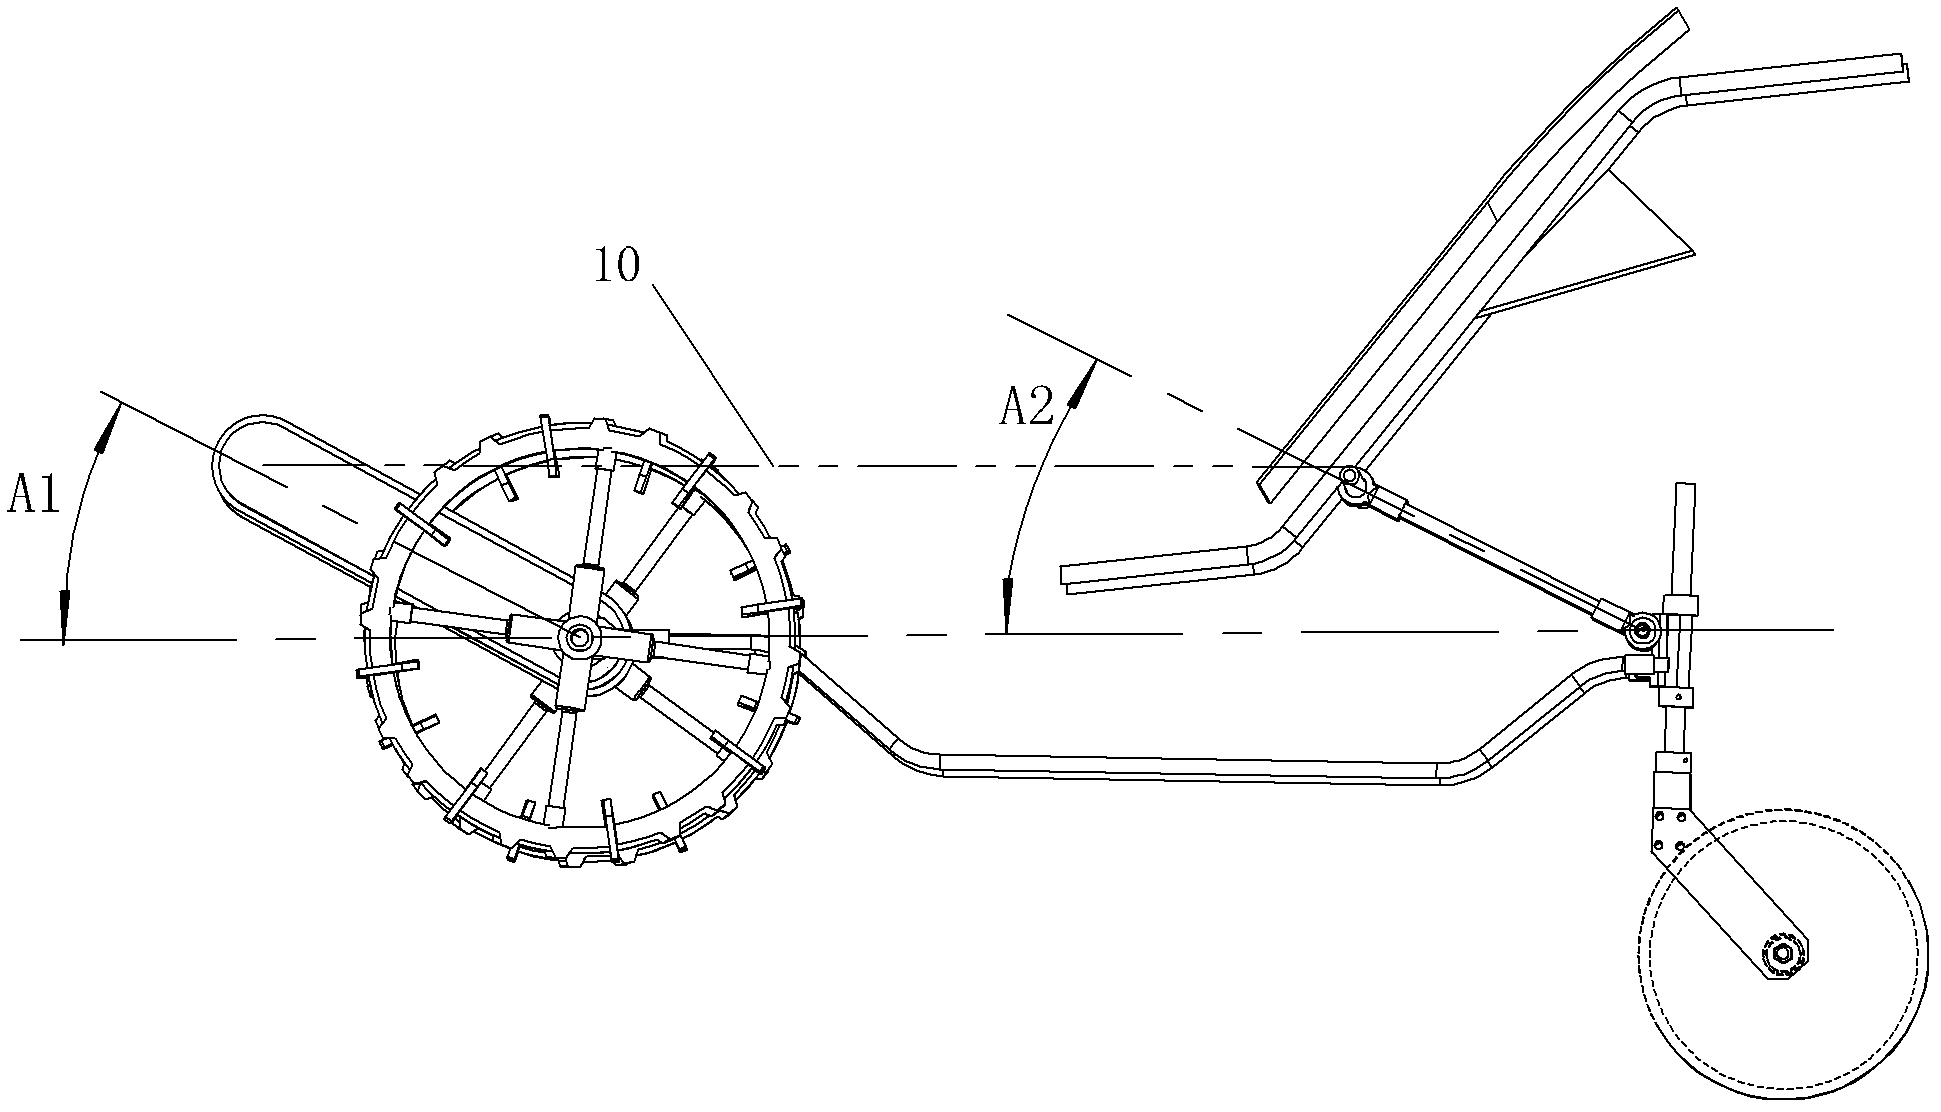 Walking type rice seedling planter traveling mechanism with machine frame capable of doing up-and-down movement